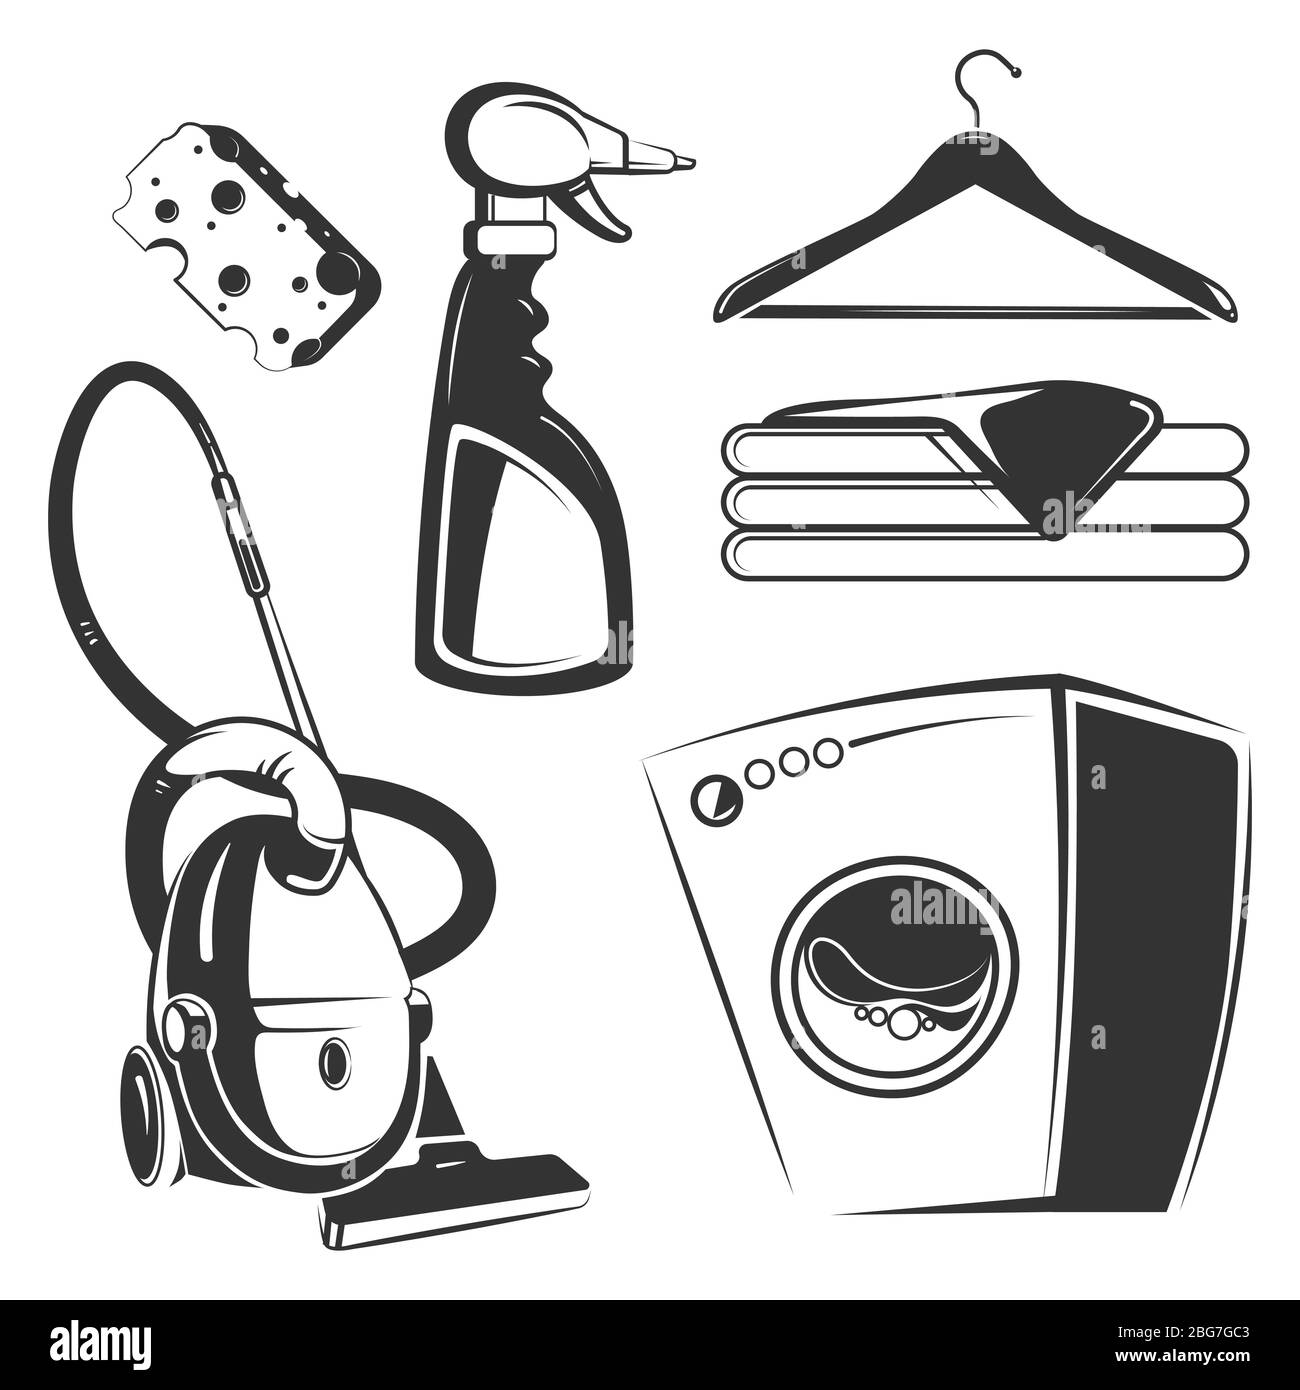 Cleaning, washing, housework objects isolated on white background. Vector illustration Stock Vector